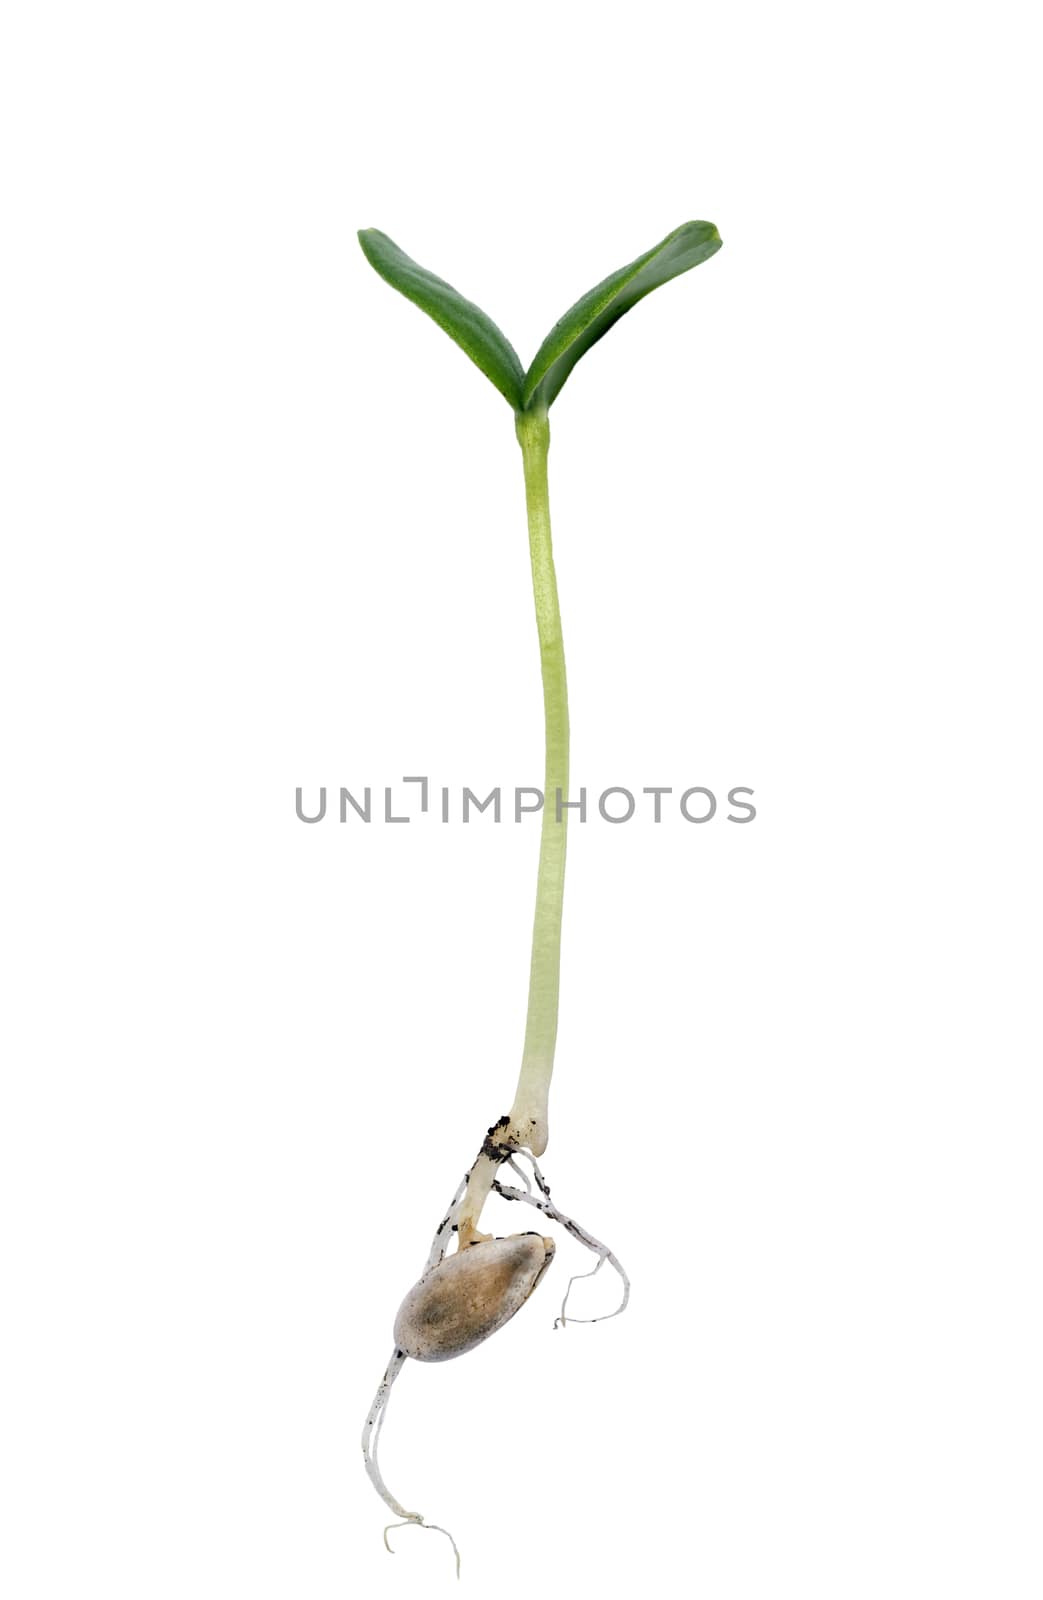 Green Sprout With Roots by stockbuster1